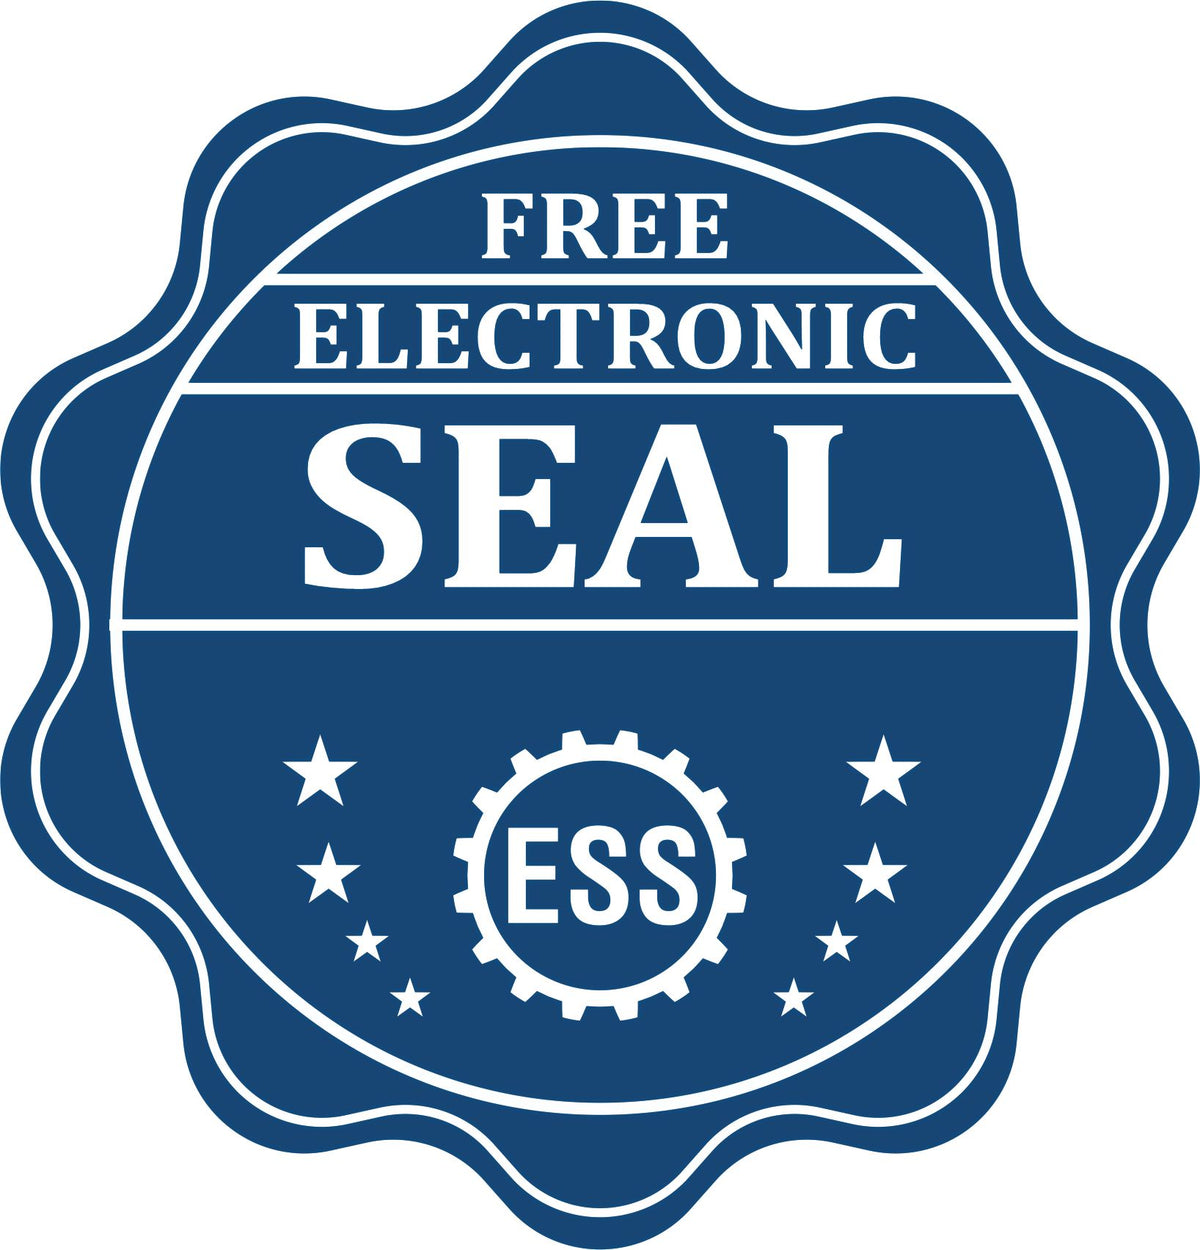 A badge showing a free electronic seal for the Handheld Colorado Architect Seal Embosser with stars and the ESS gear on the emblem.